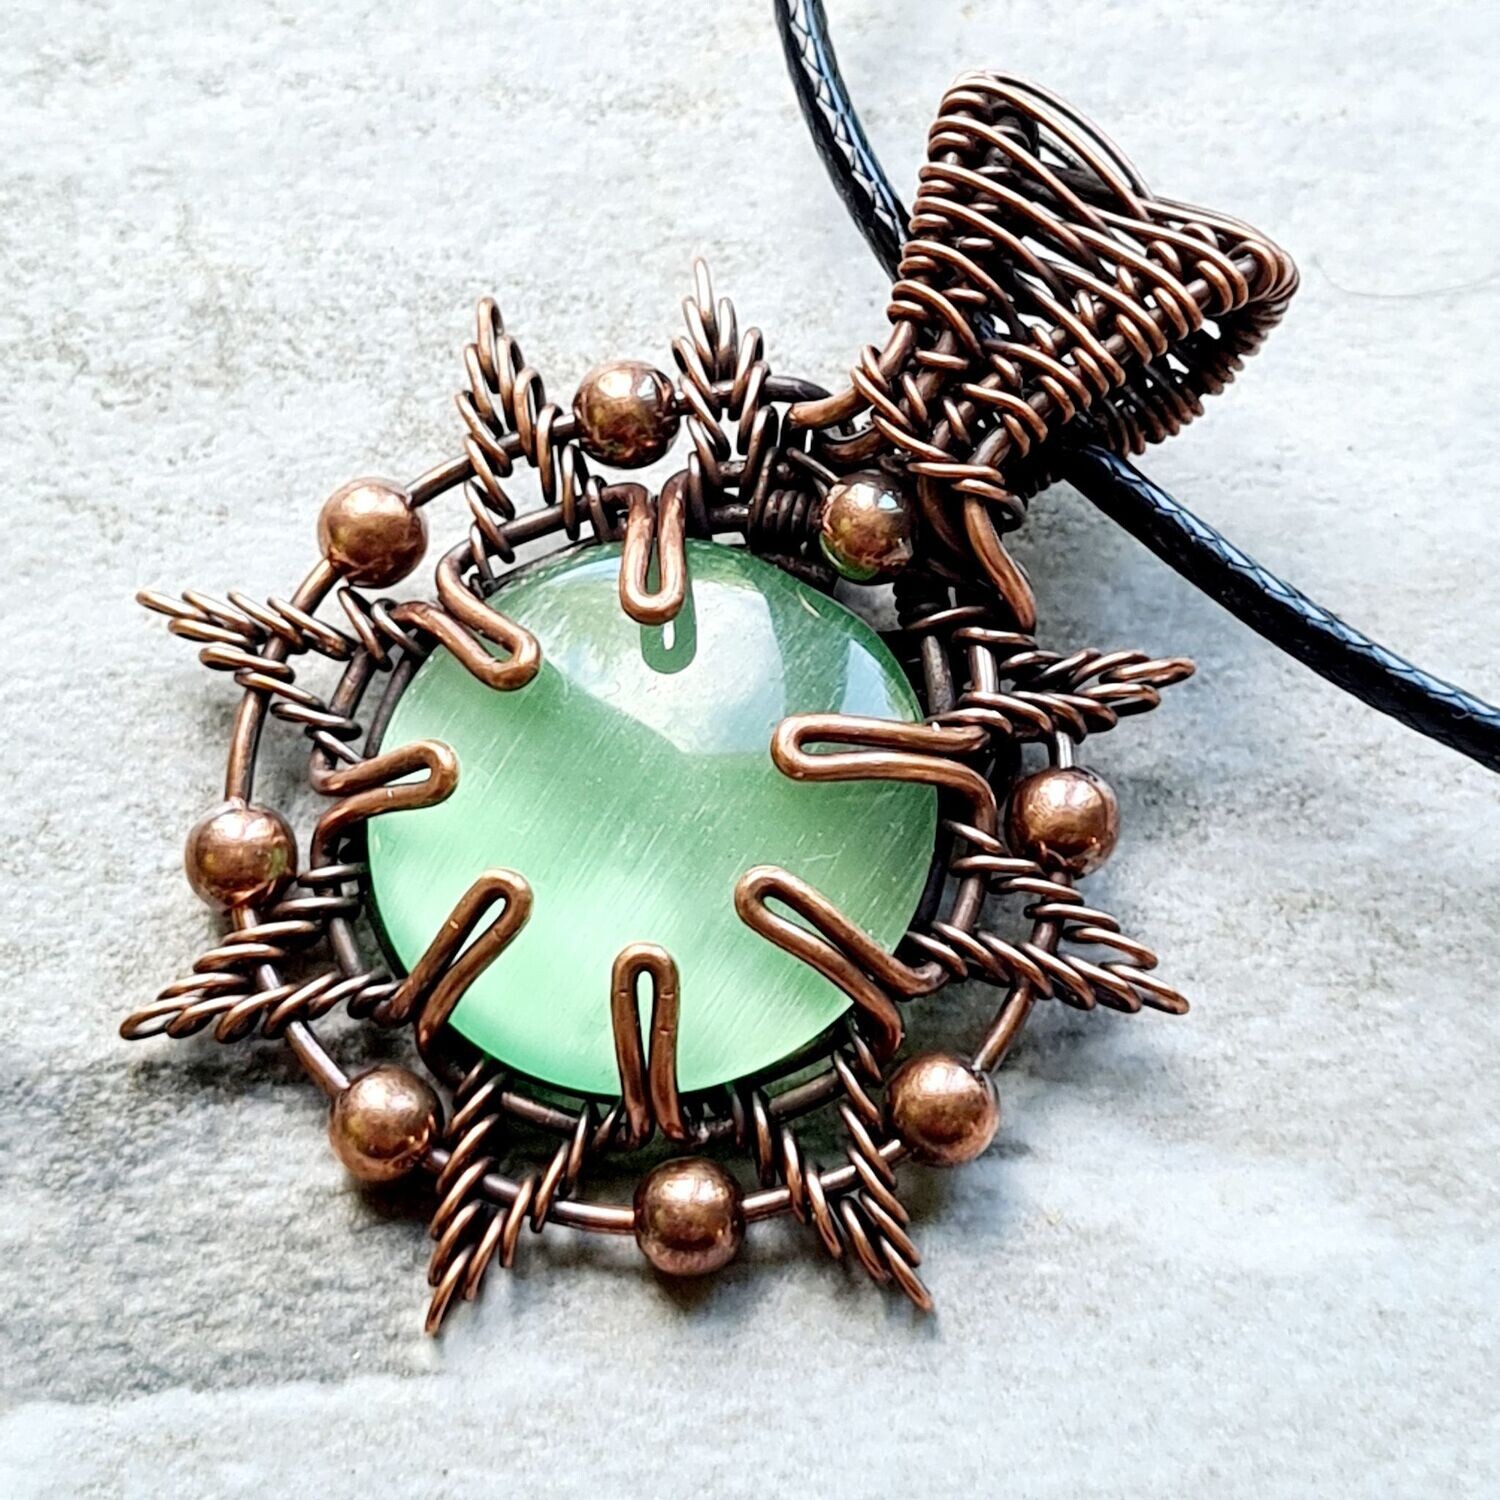 Green Chrysoberyl "Cat's Eye" Star with beads pendant with chain.